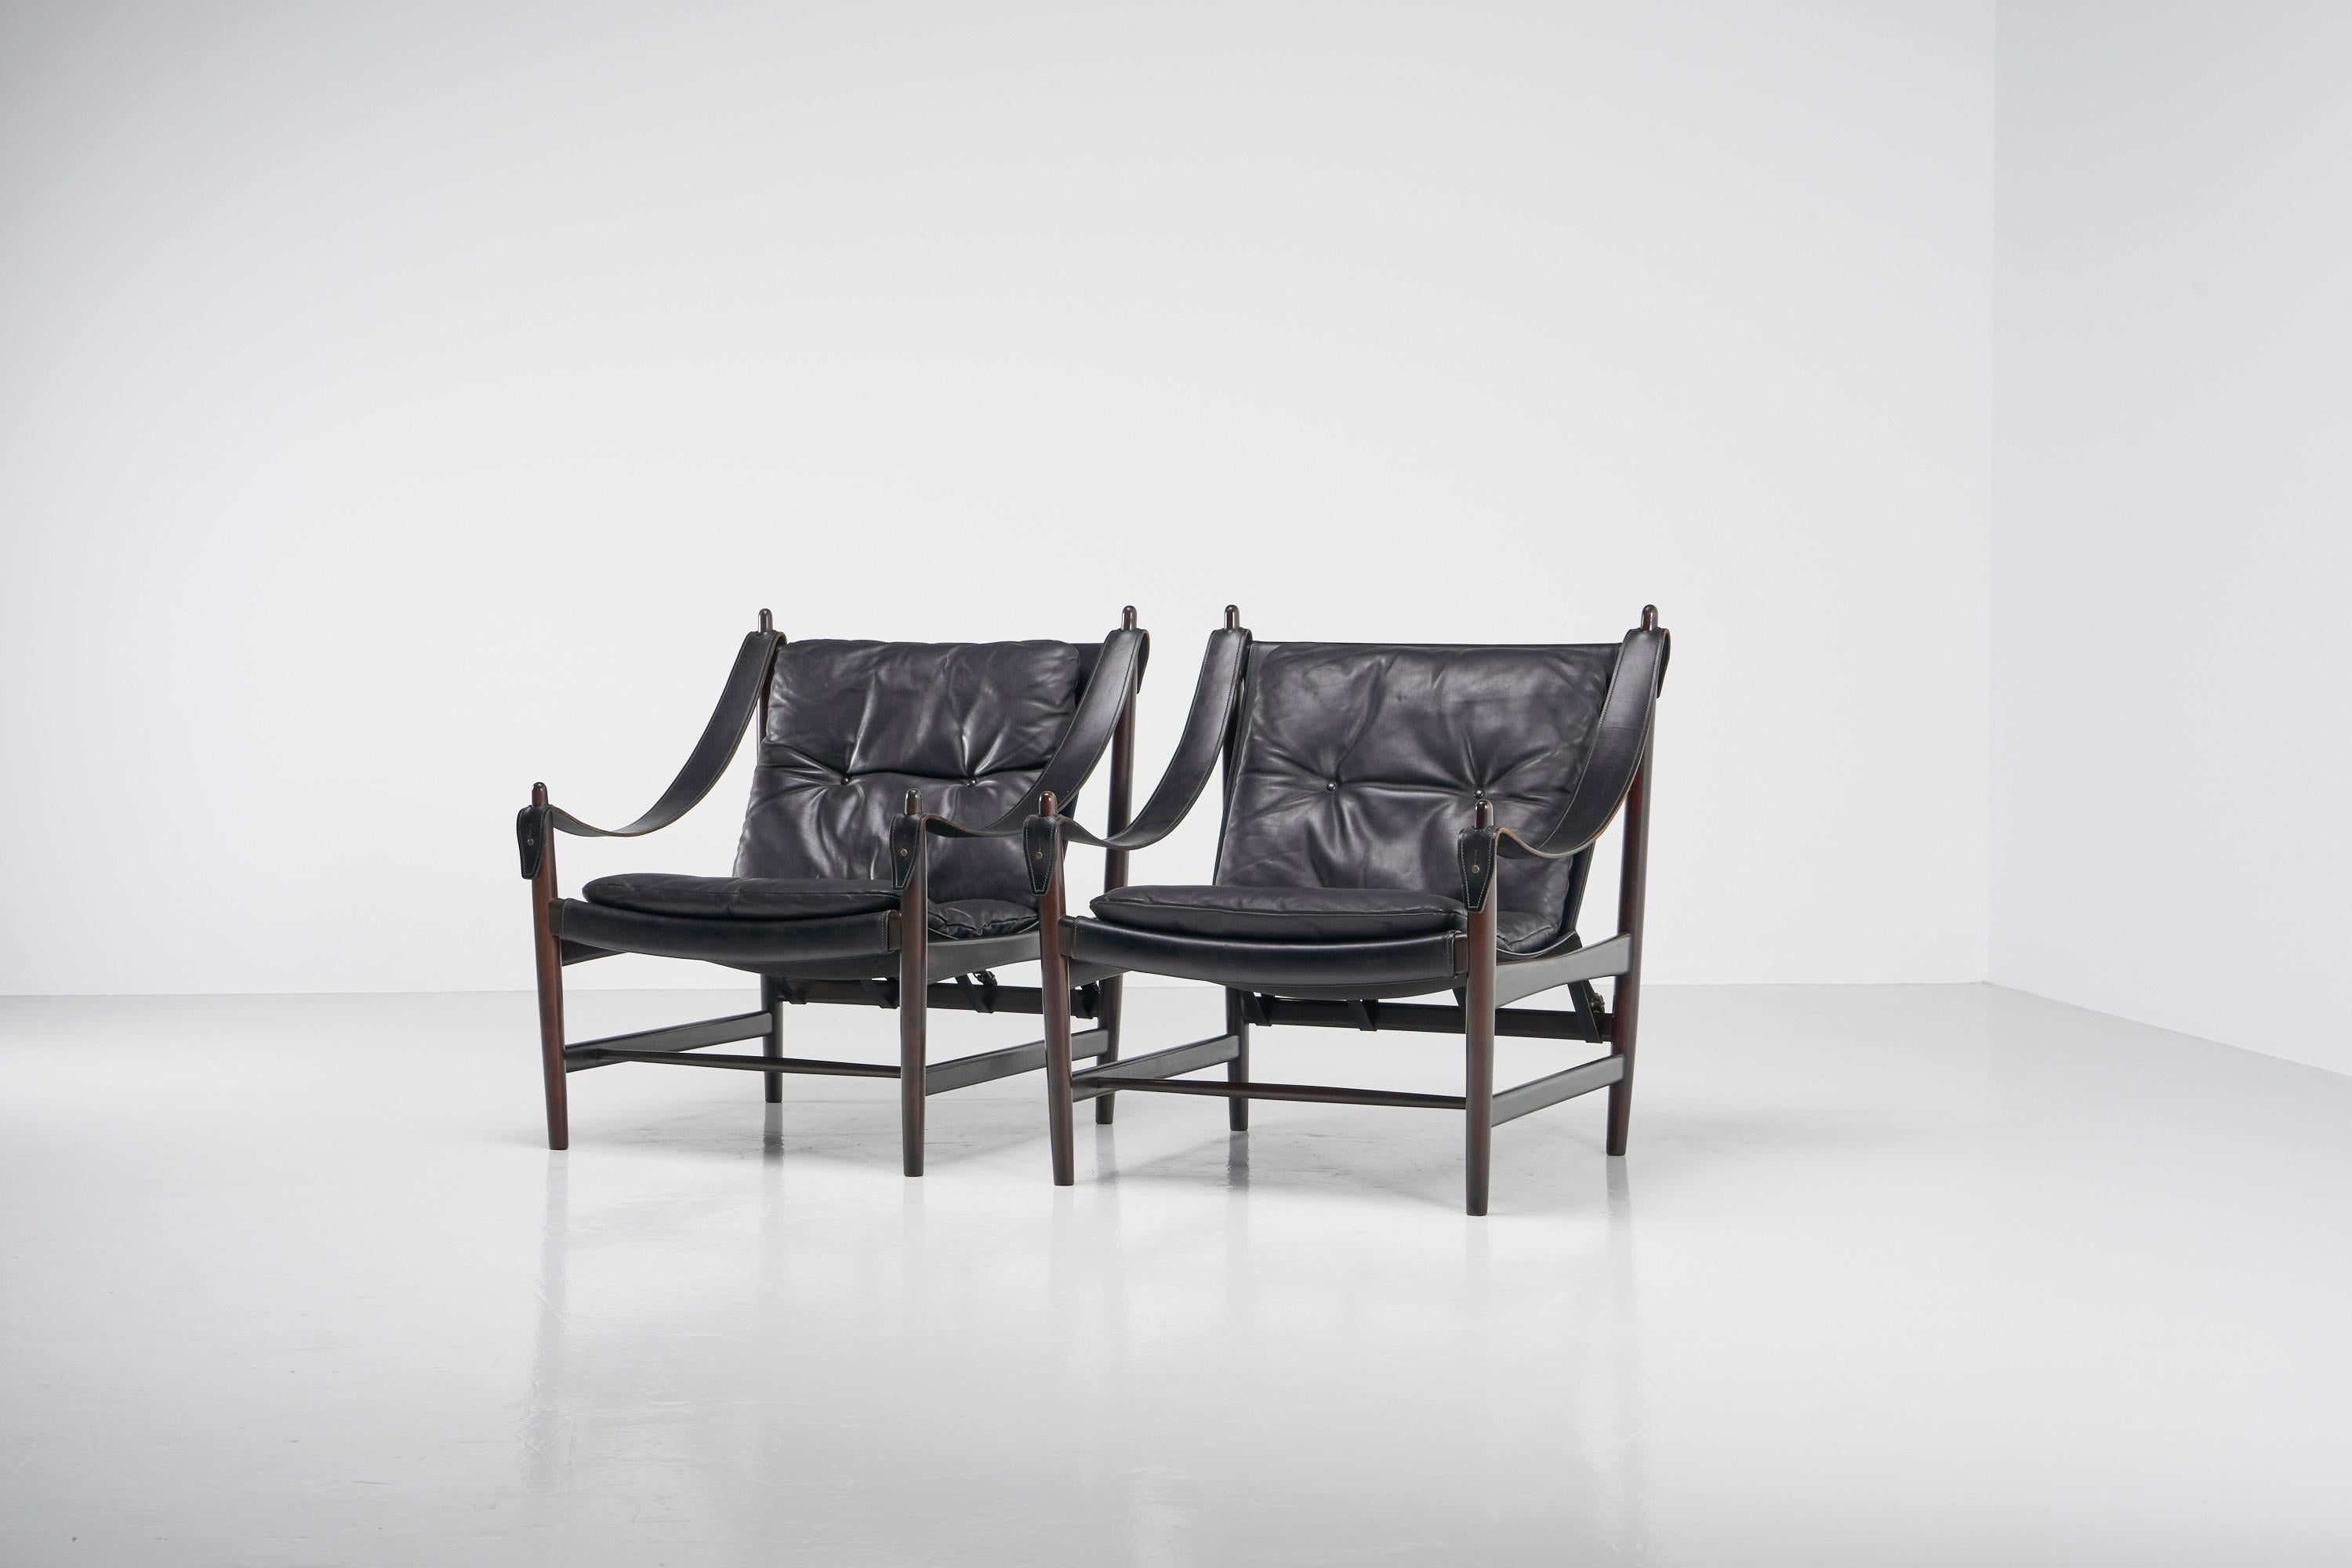 Stunning Nordic pair of safari lounge chairs in original condition, made in Norway 1965. These fantastic chairs are made of solid mahogany frames and thick black saddle leather seats, and are in a very good and original condition. The chairs are